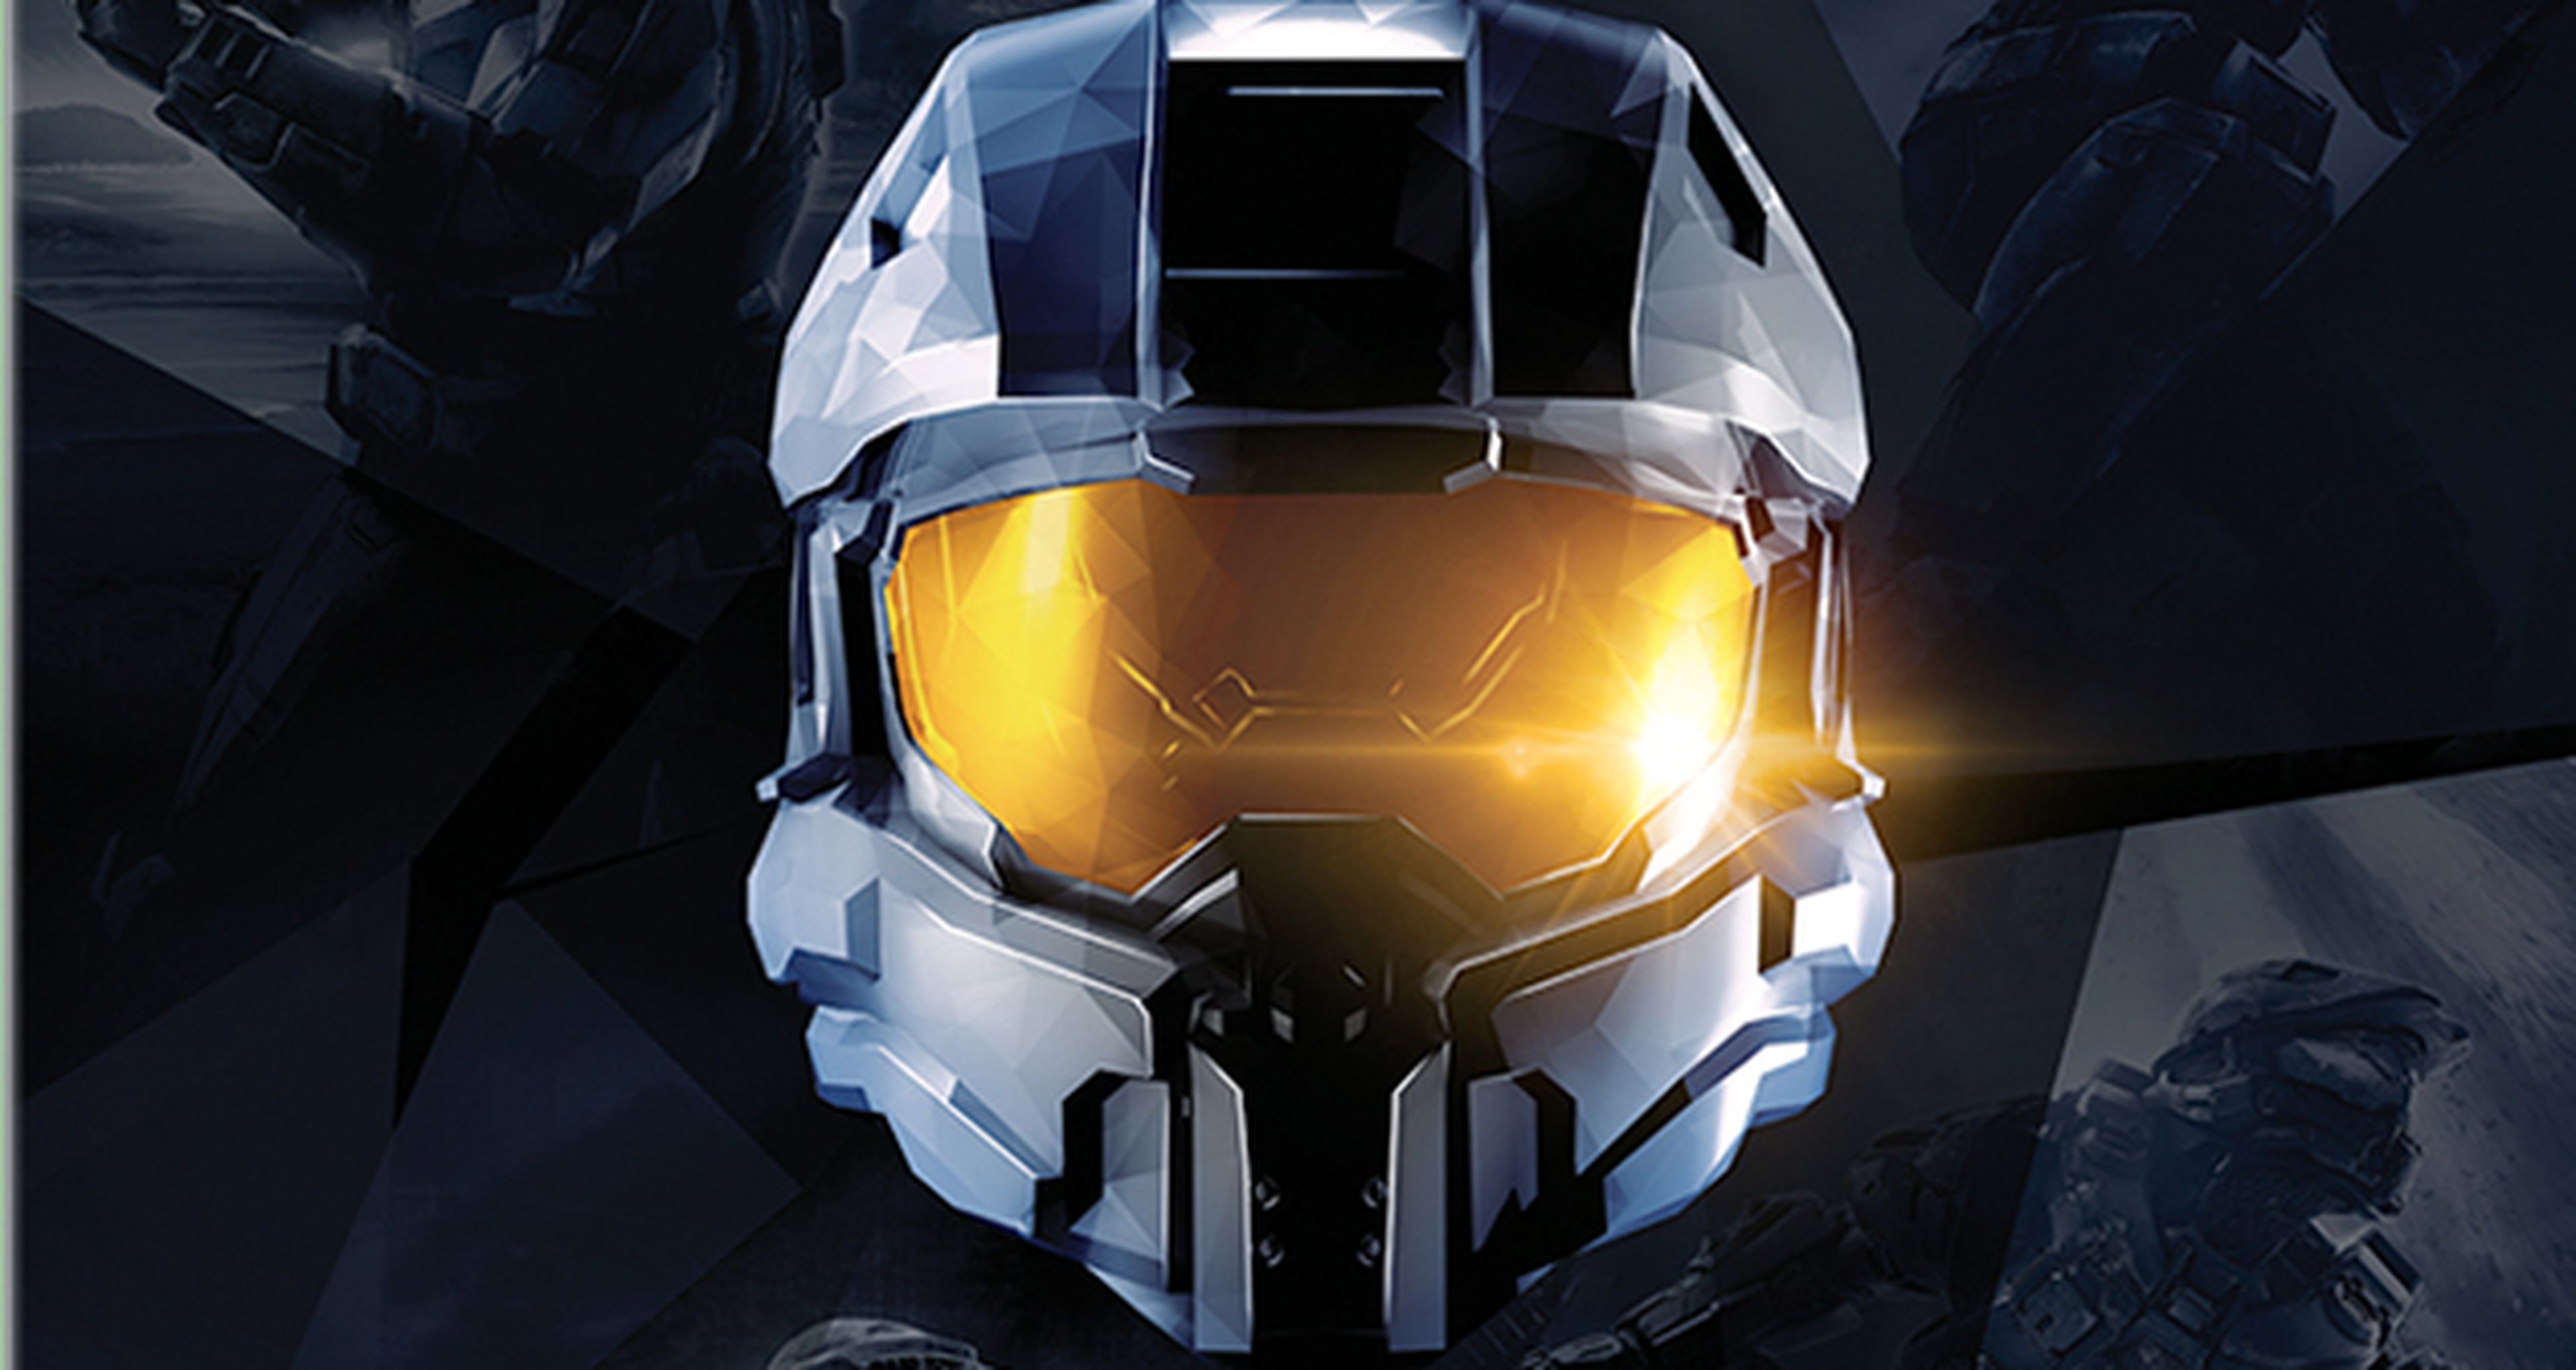 Avance de Halo: The Master Chief Collection